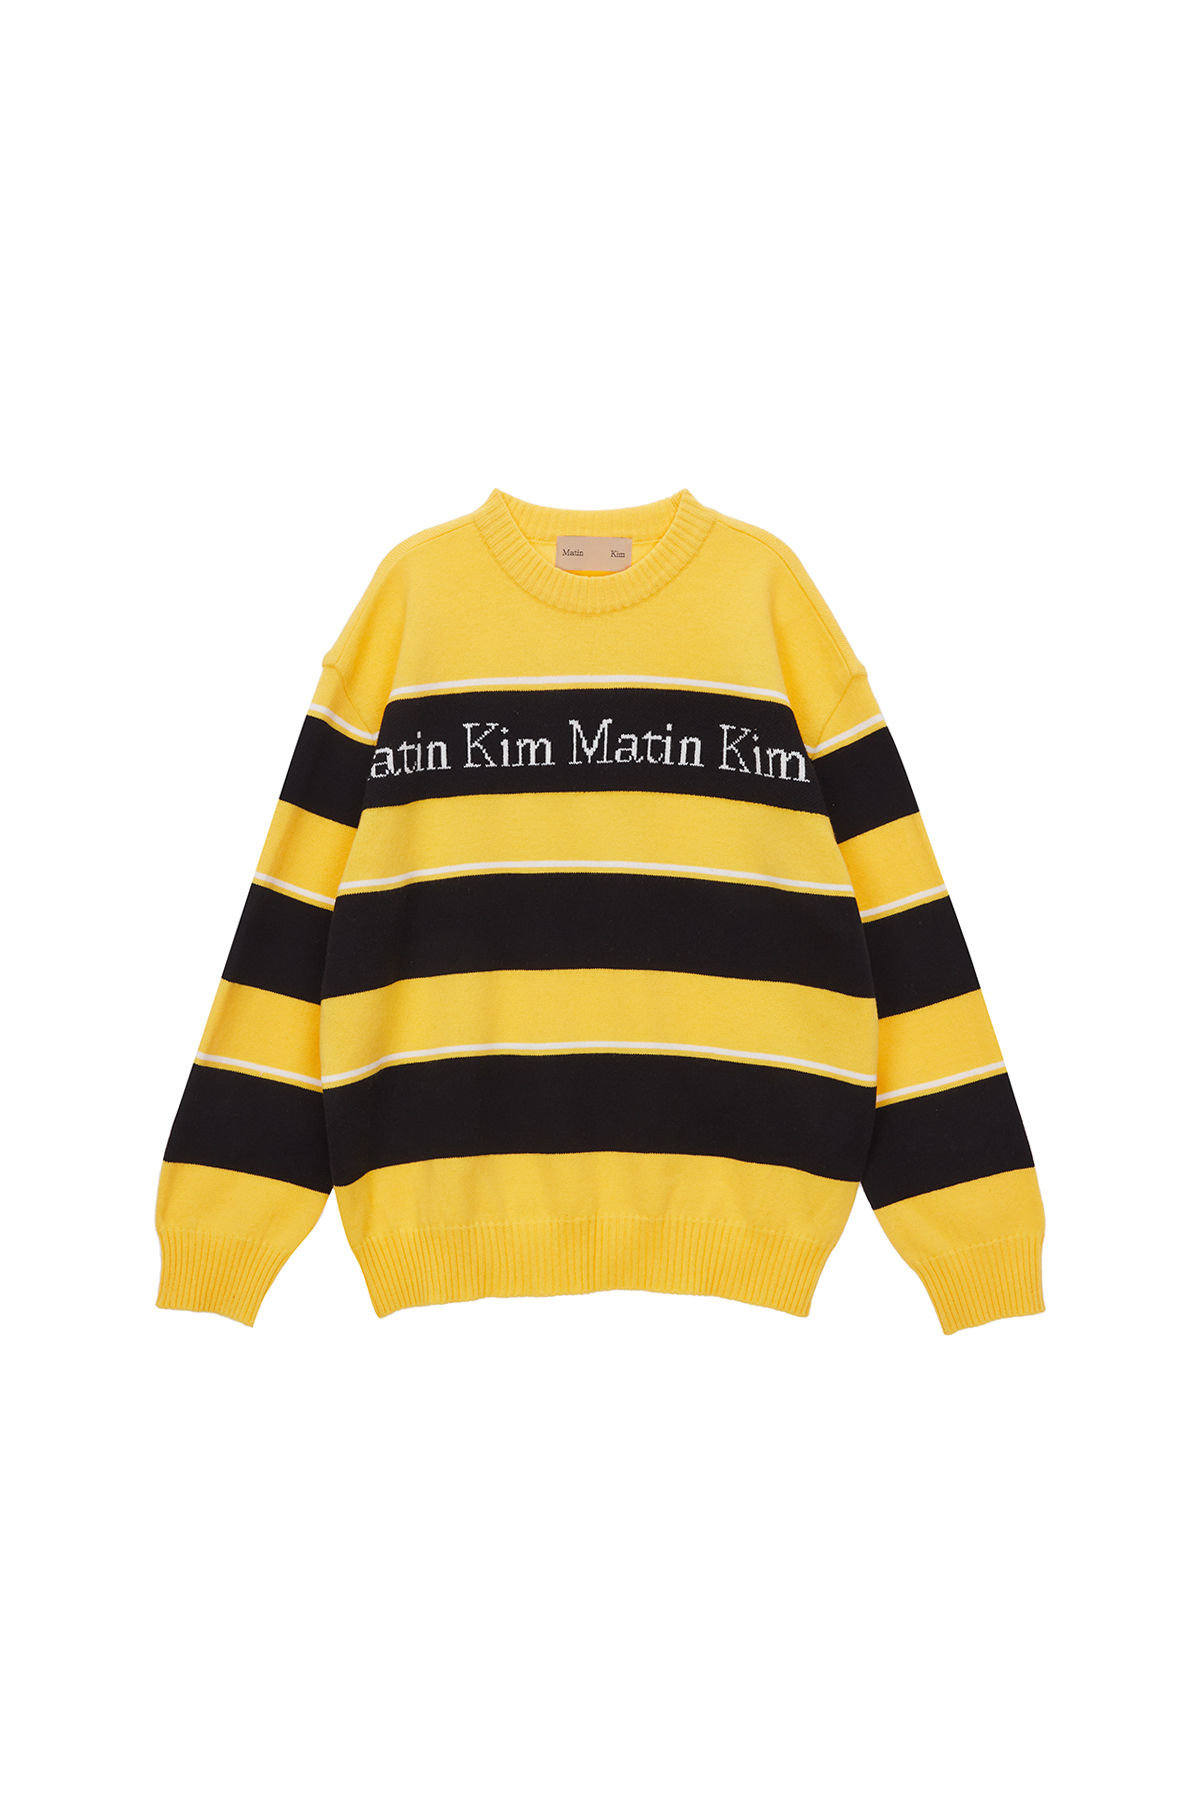 MATIN STRIPE KNIT PULLOVER IN YELLOW